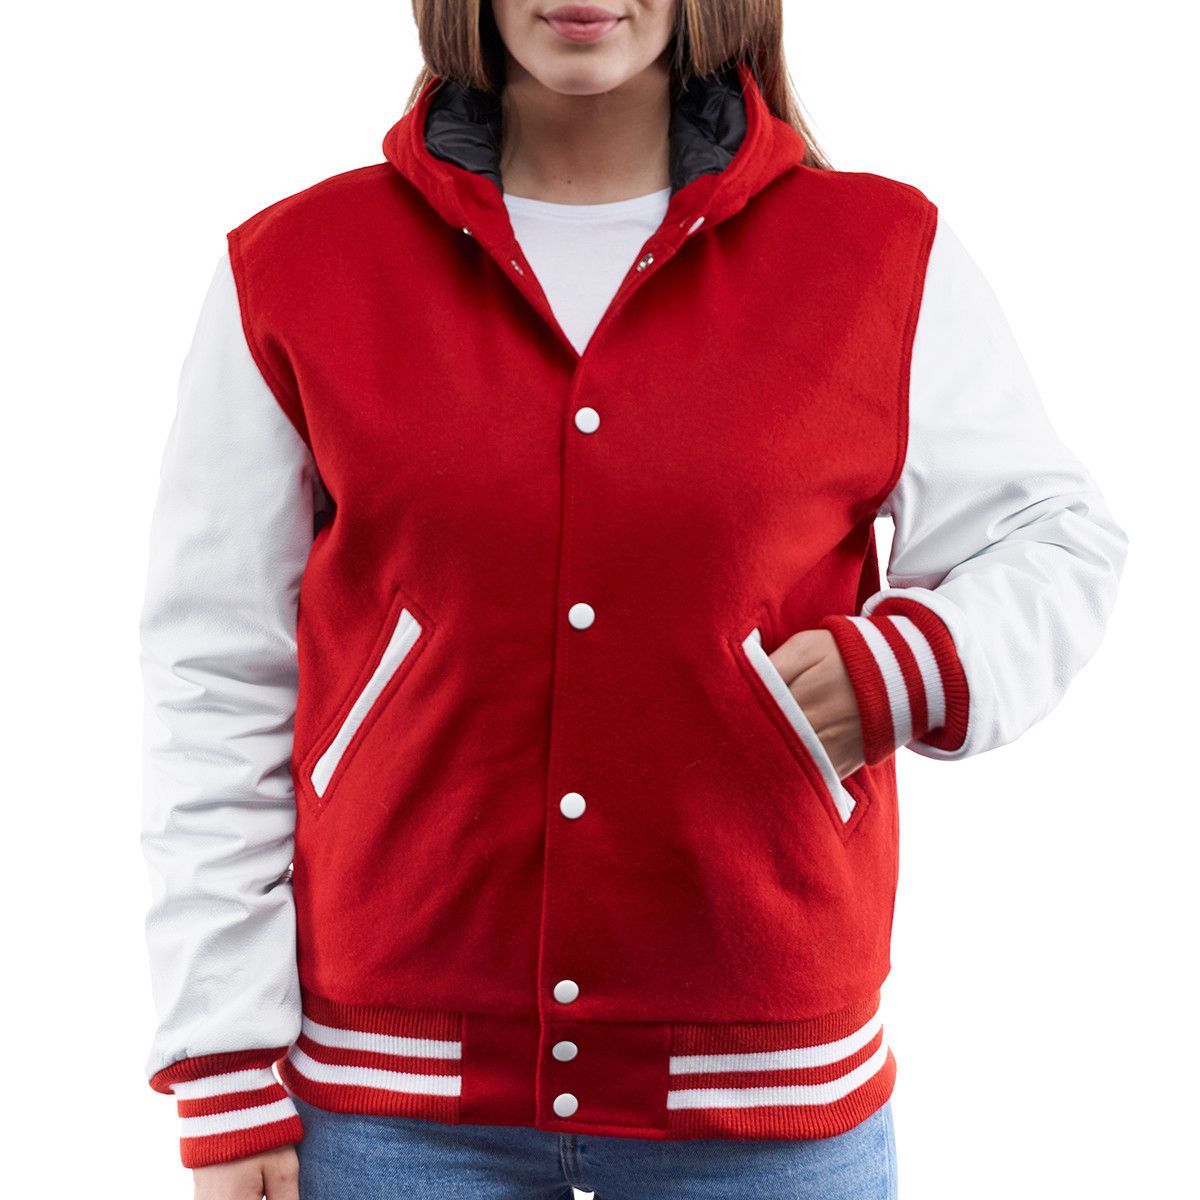 Women's Hooded Varsity Leather Jacket In Red & White SleevesWomen's Hooded Varsity Leather Jacket In Red & White Sleeves